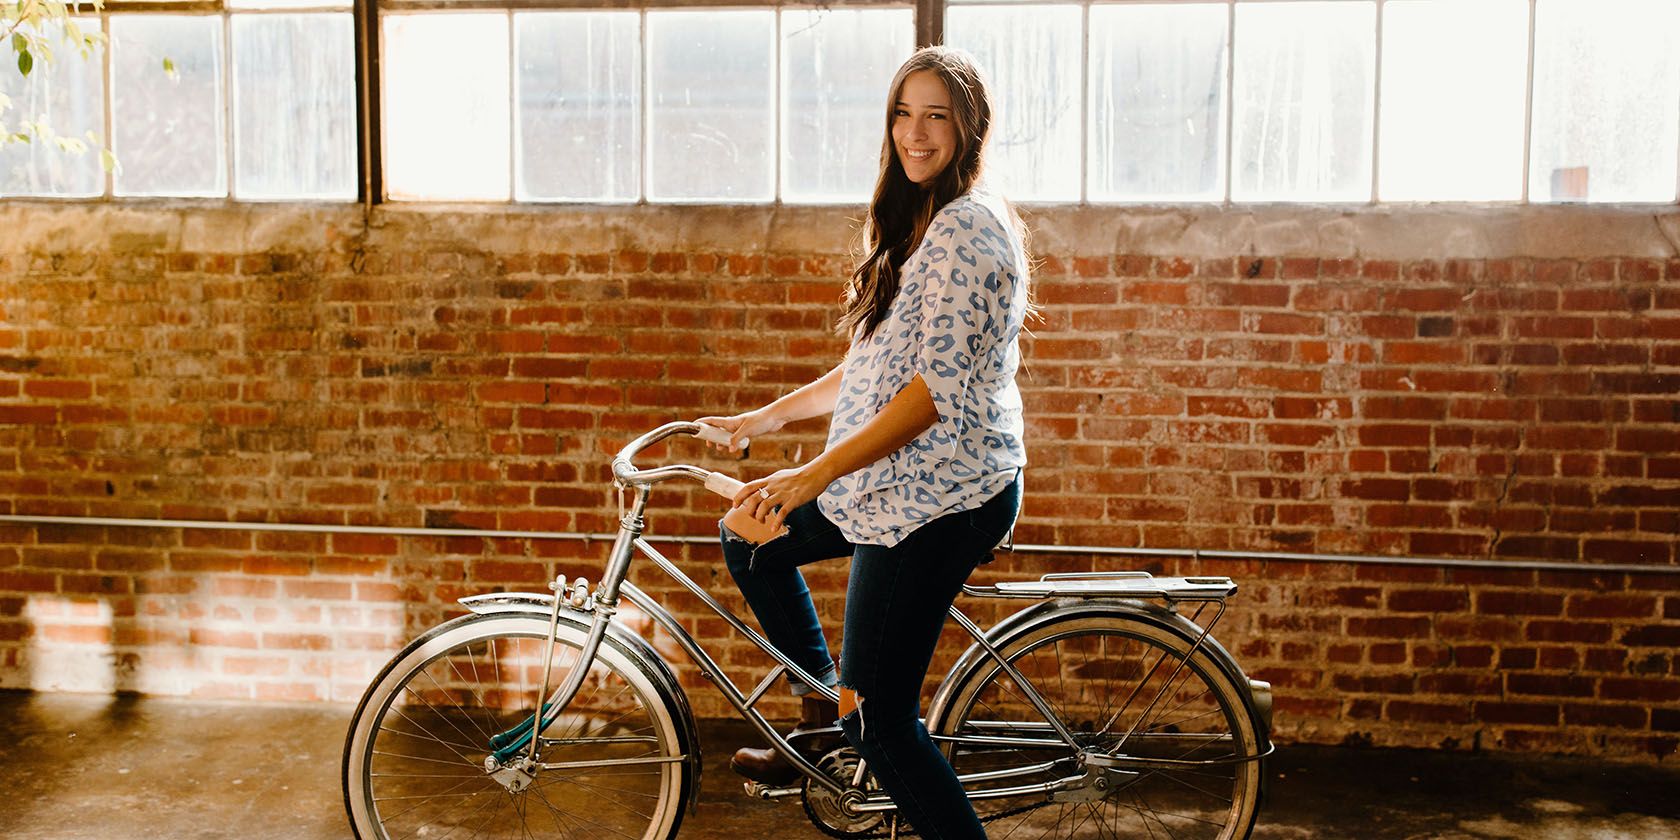 Person smiling on a bicycle